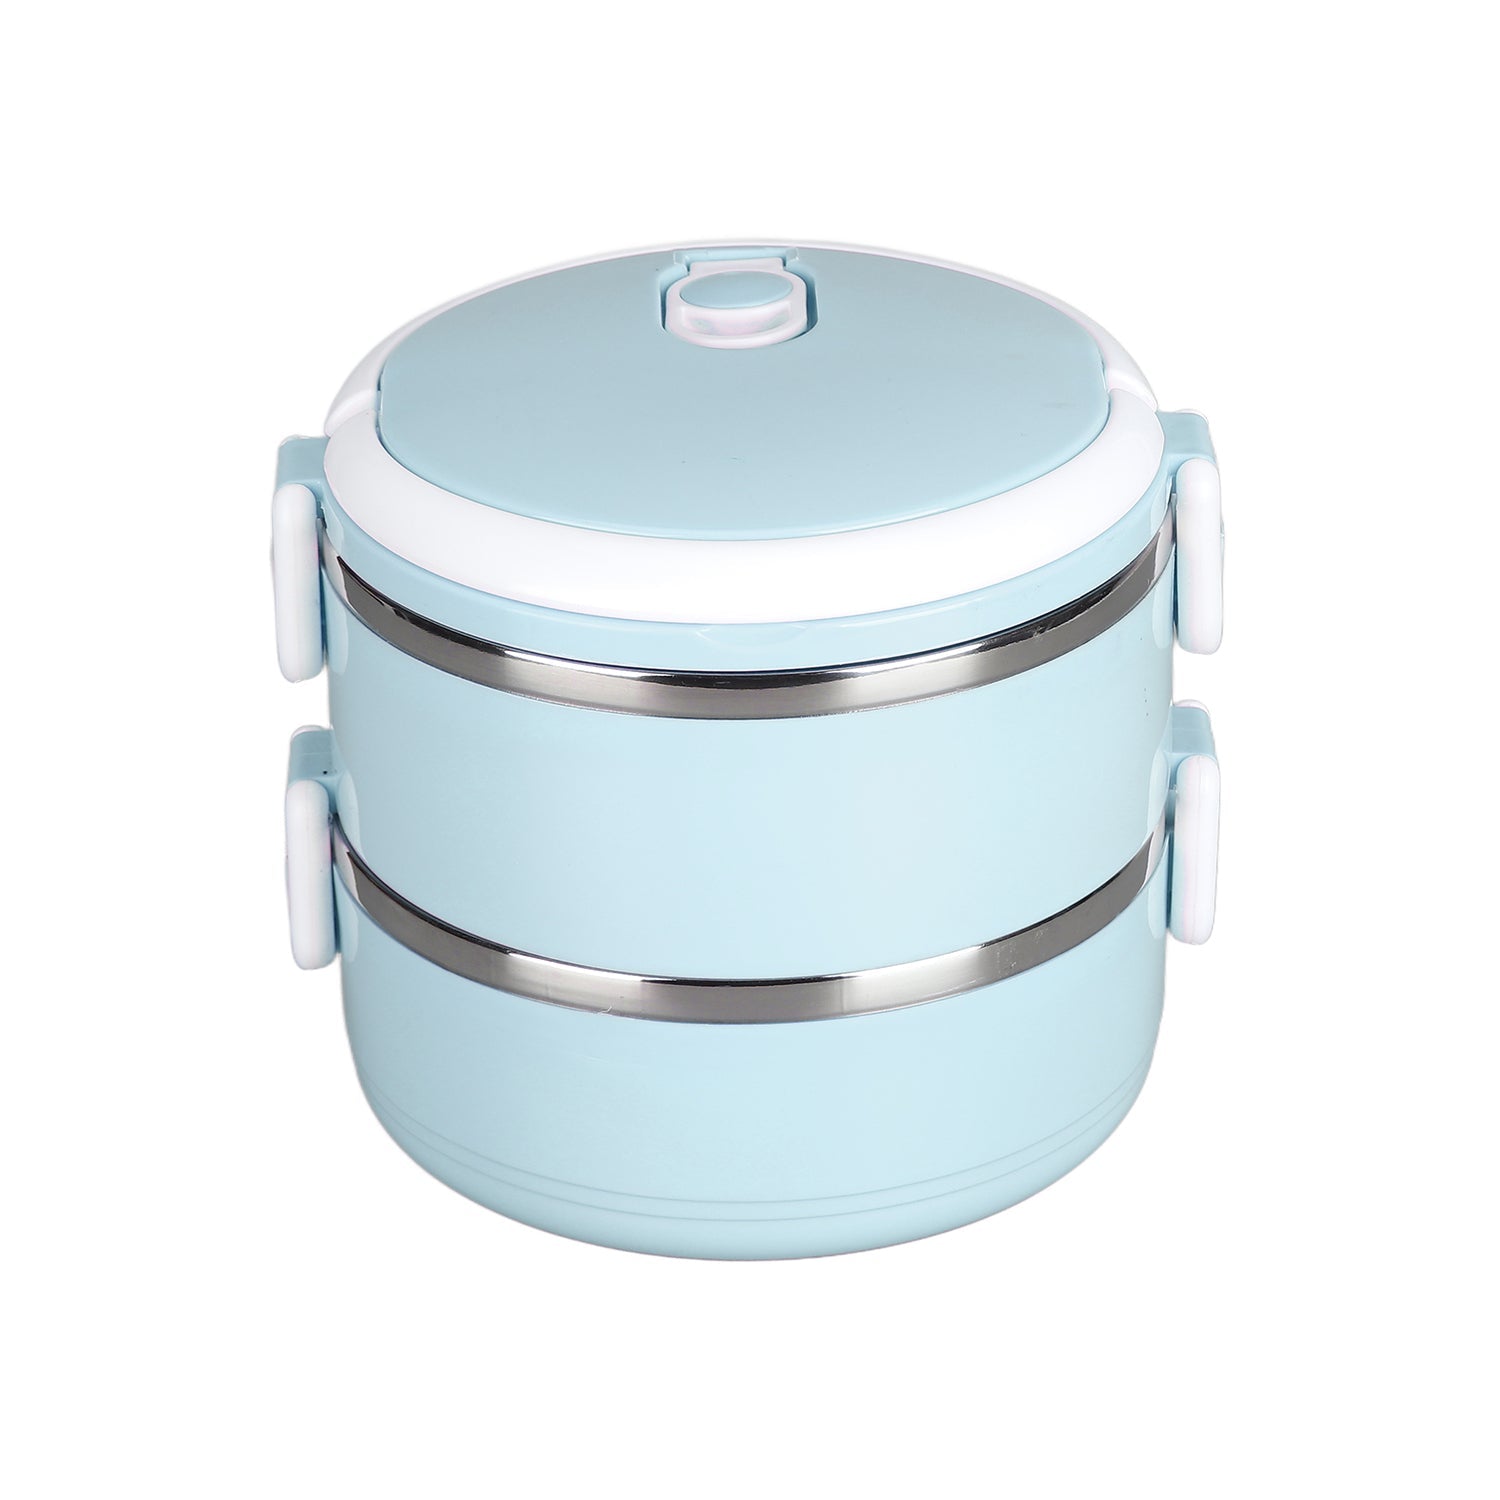 2873 Multi Layer Stainless Steel Hot Lunch Box (2 Layer) DeoDap